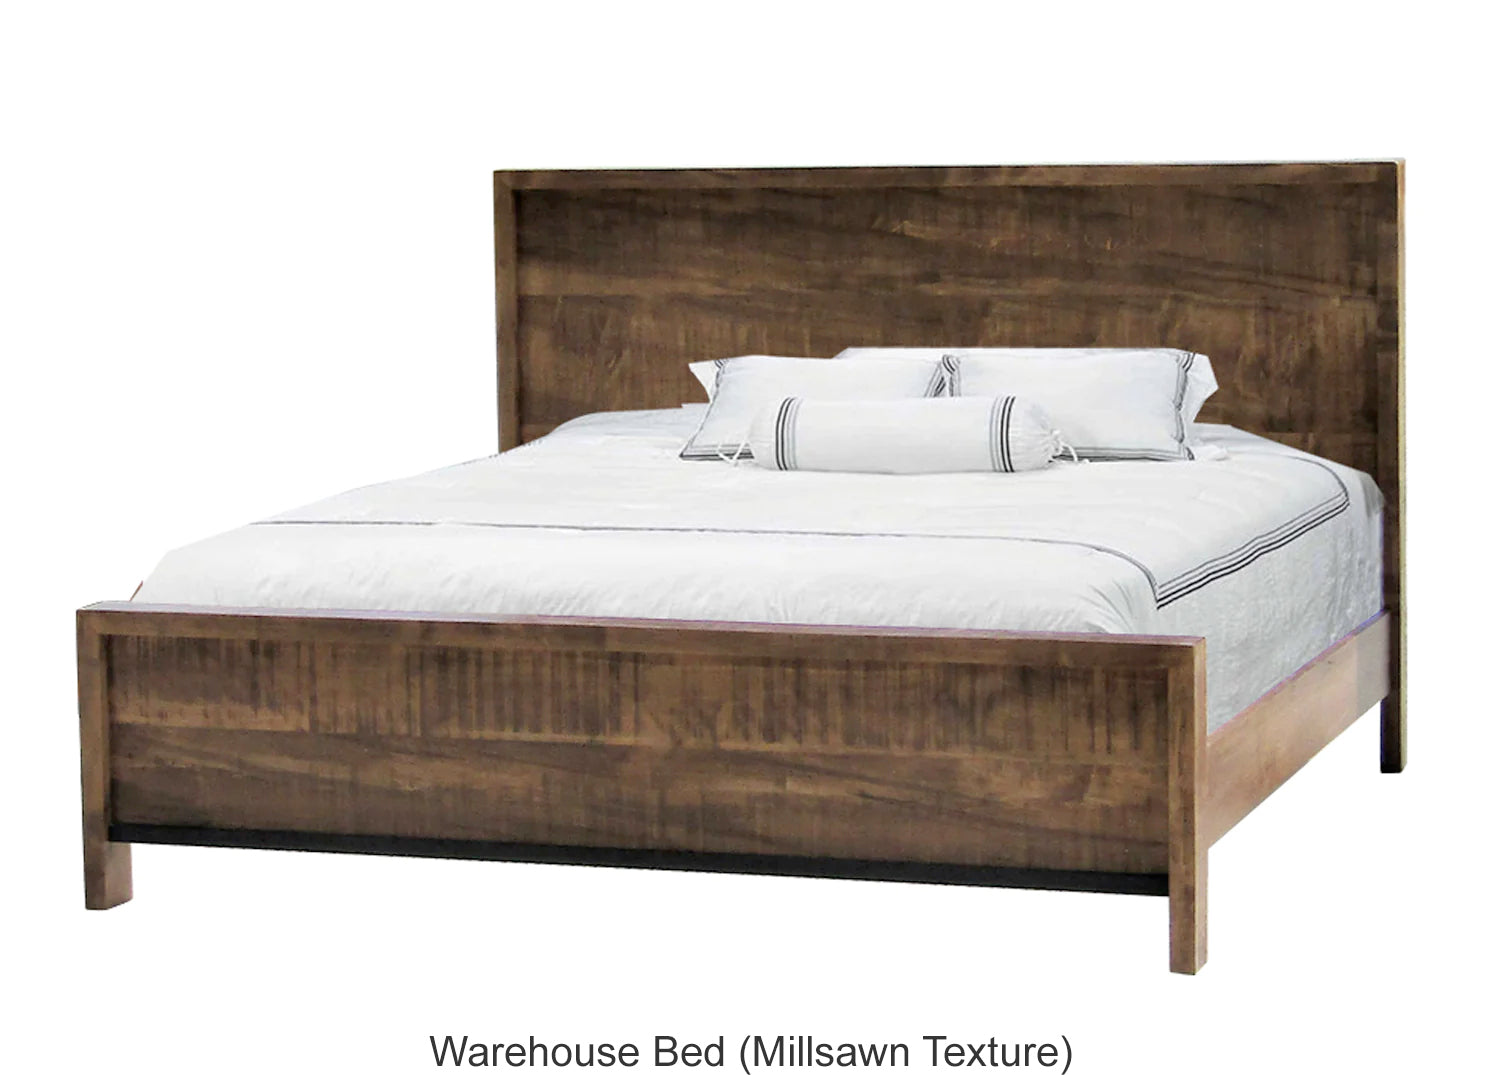 Warehouse Bed (Millsawn Texture)